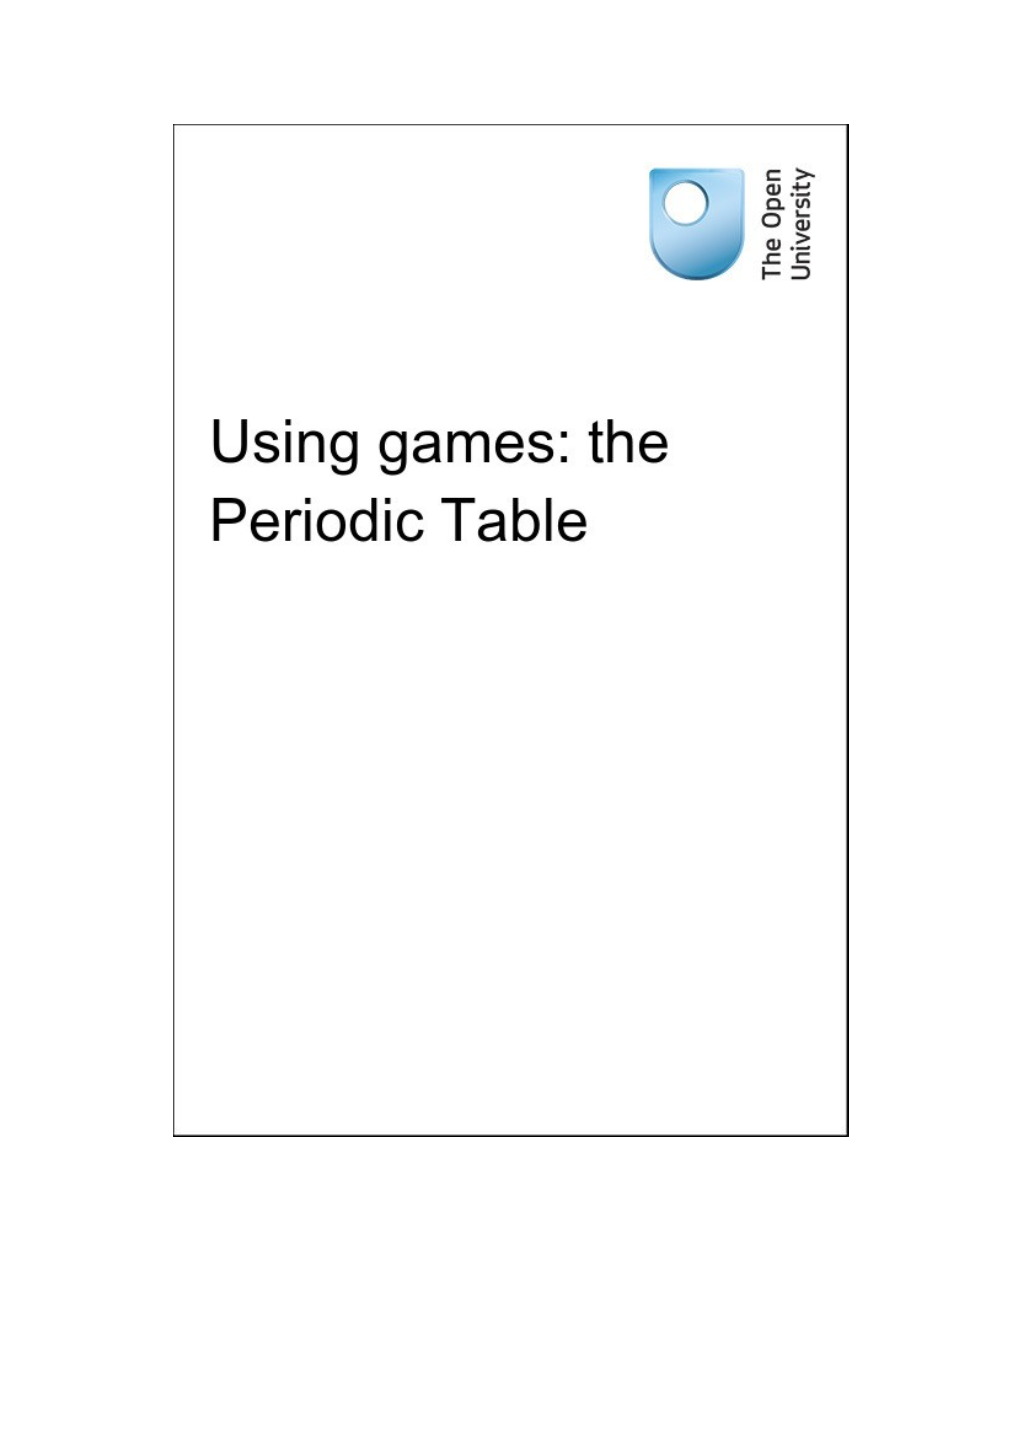 Using Games: the Periodic Table